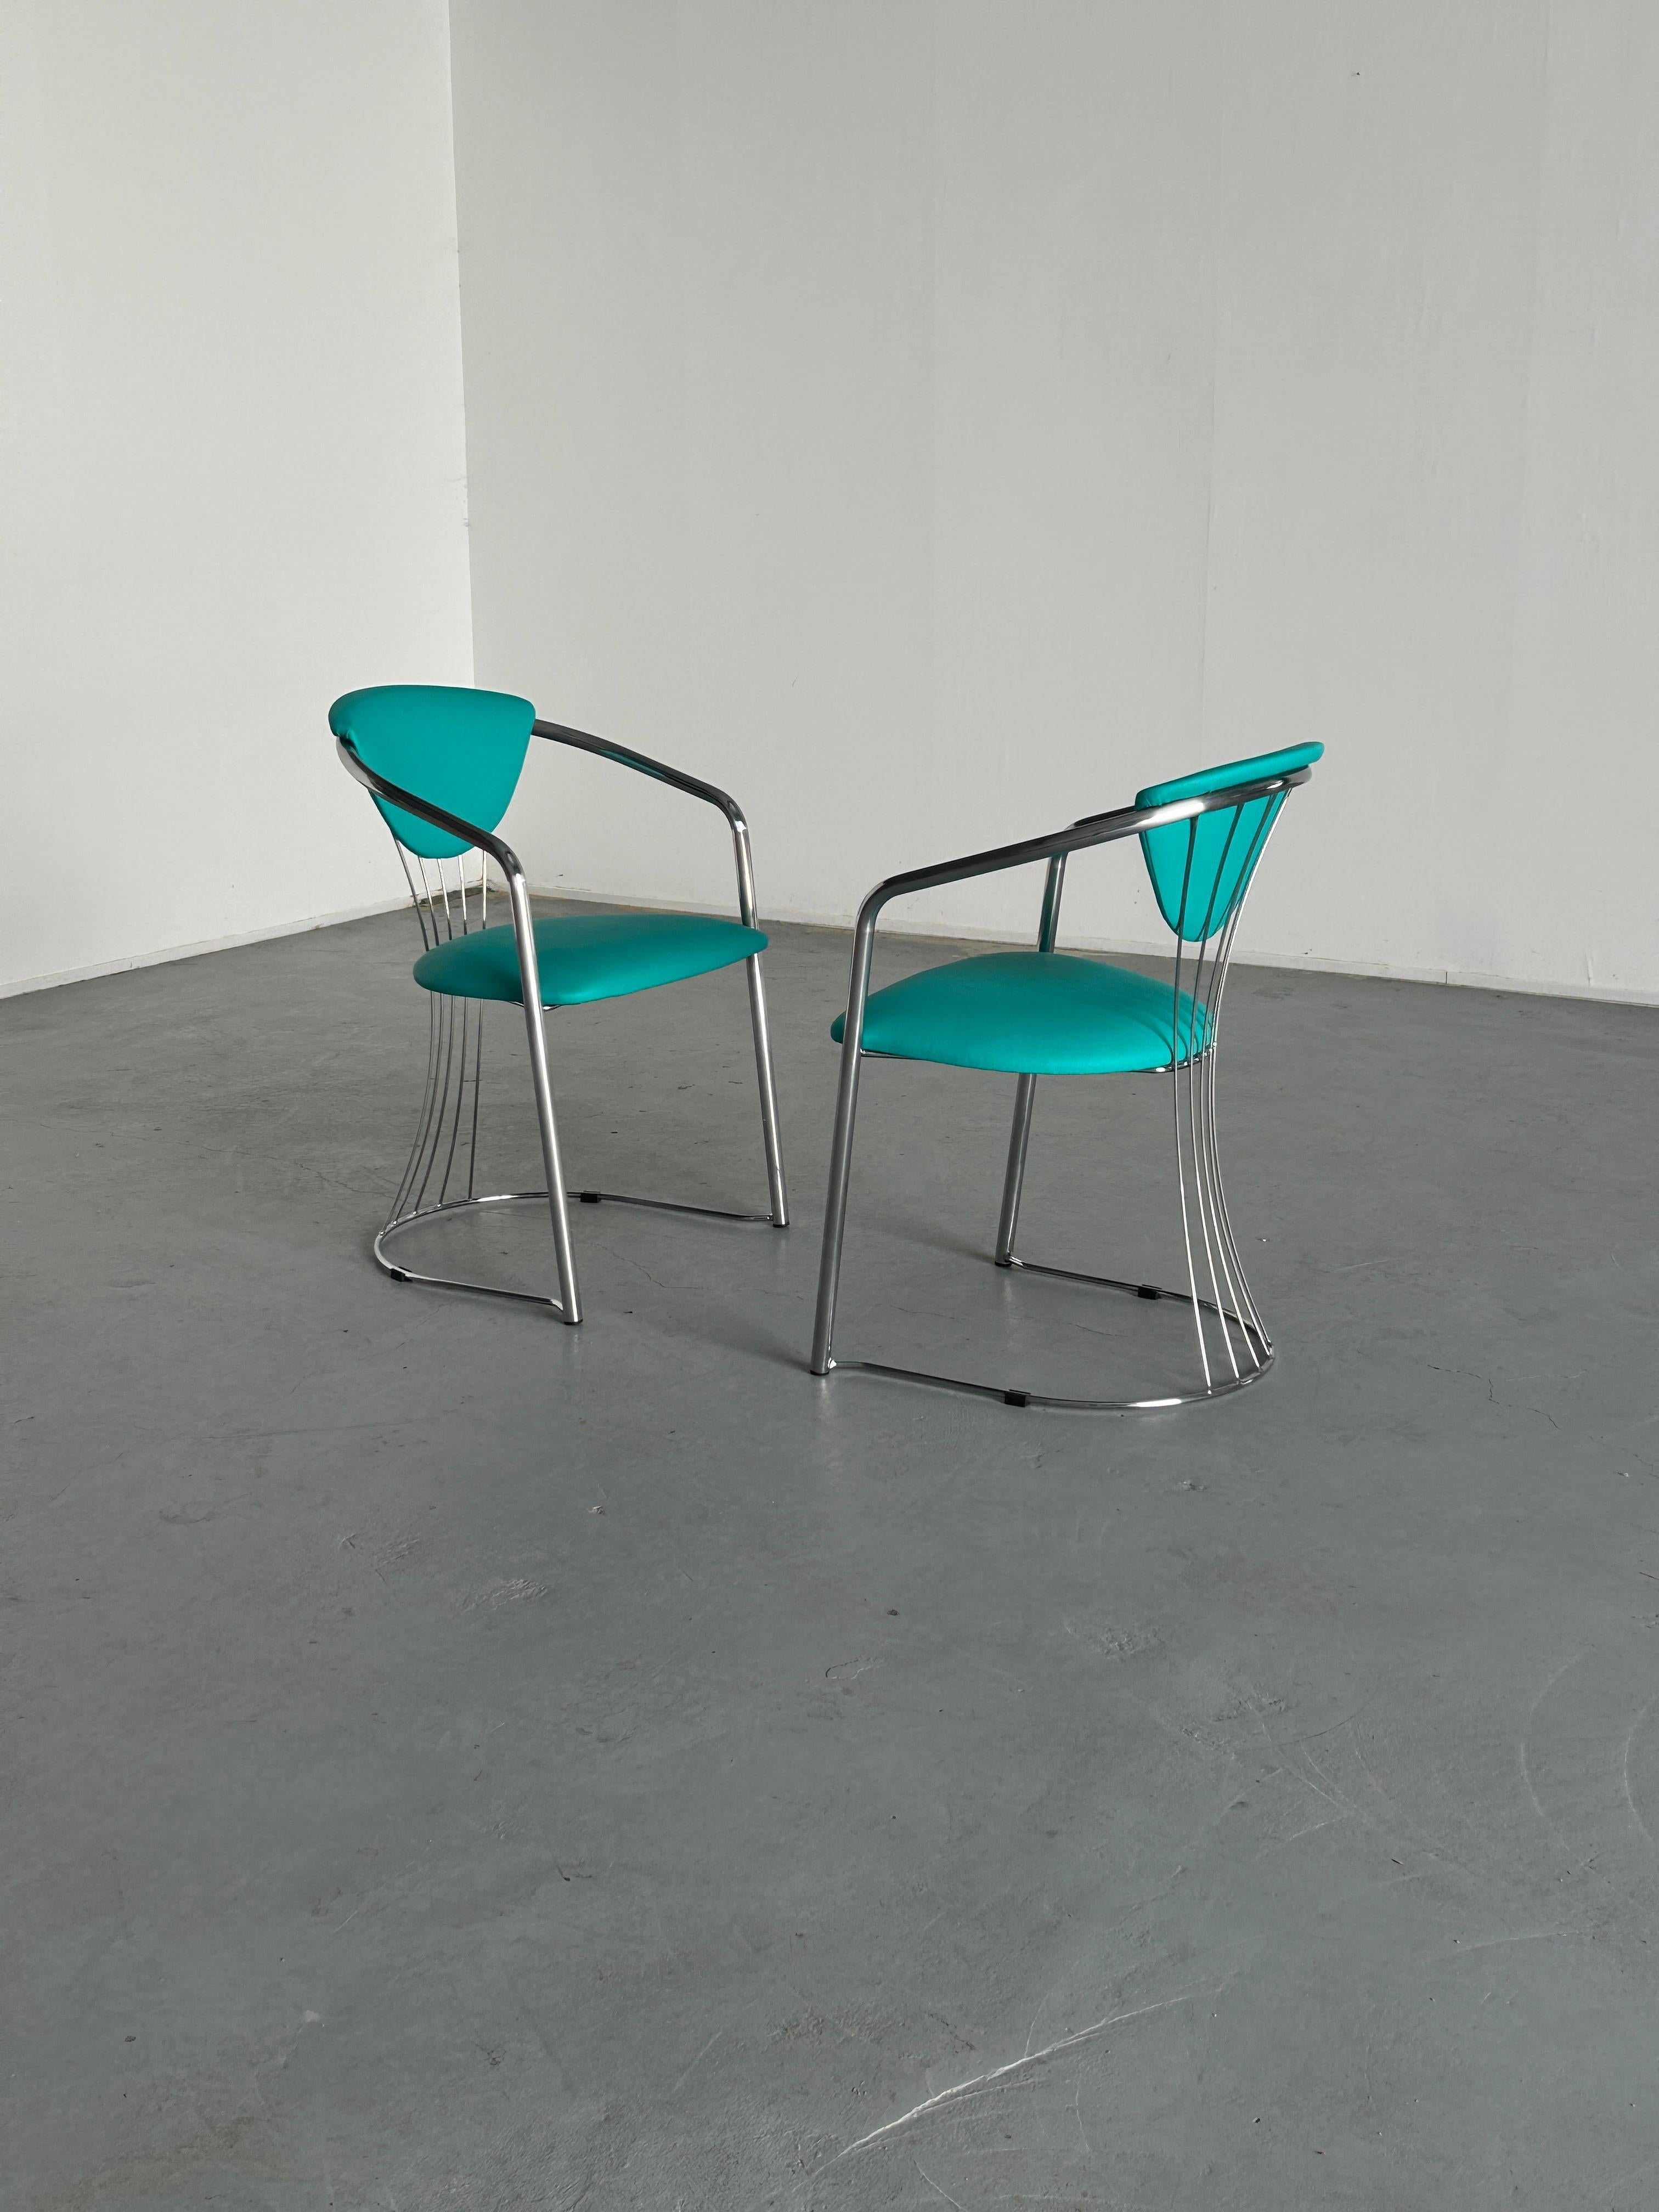 Late 20th Century 1 of 2 Vintage Steel and Mint Green Faux Leather Dining Chairs by Effezeta, 90s For Sale